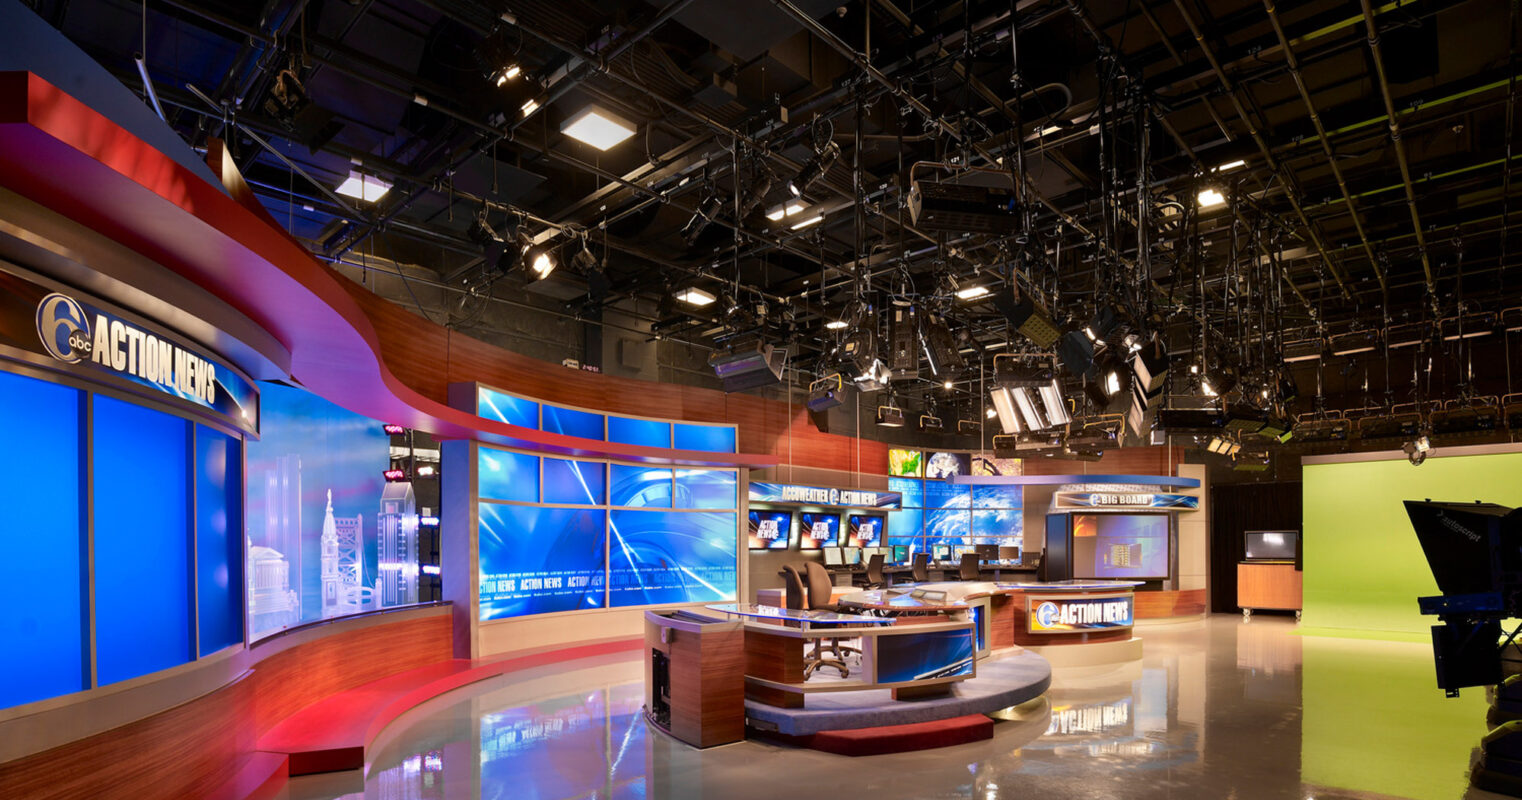 Modern broadcast studio with dynamic lighting and sleek finishes. Central anchor desk with backlit panels, surrounded by high-tech screens and a chroma key green screen for visual effects.